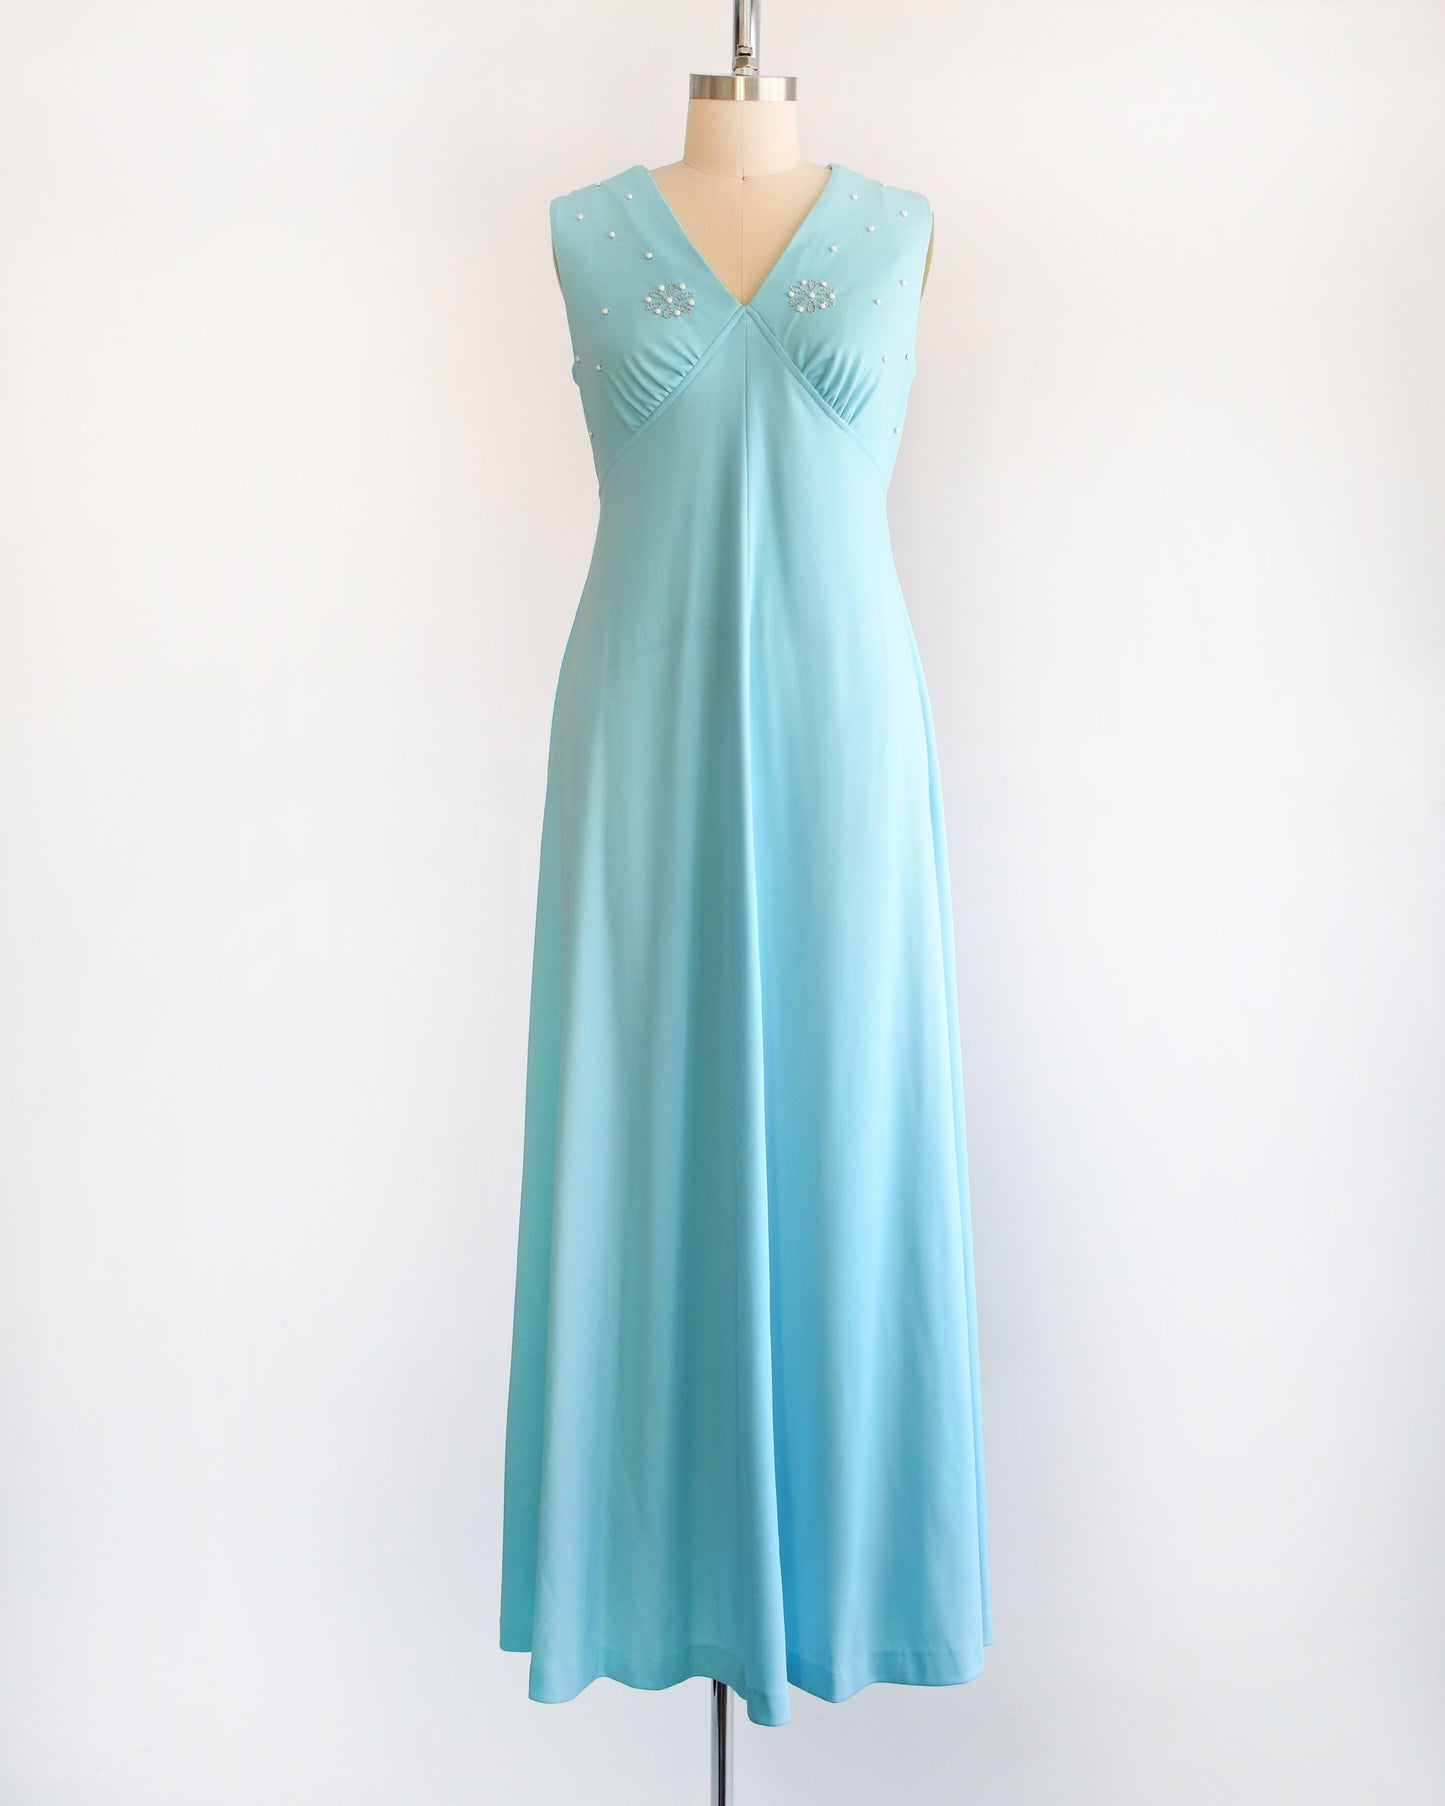 A vintage 70s blue maxi dress with small beads on the bodice. The dress is on a dress form.